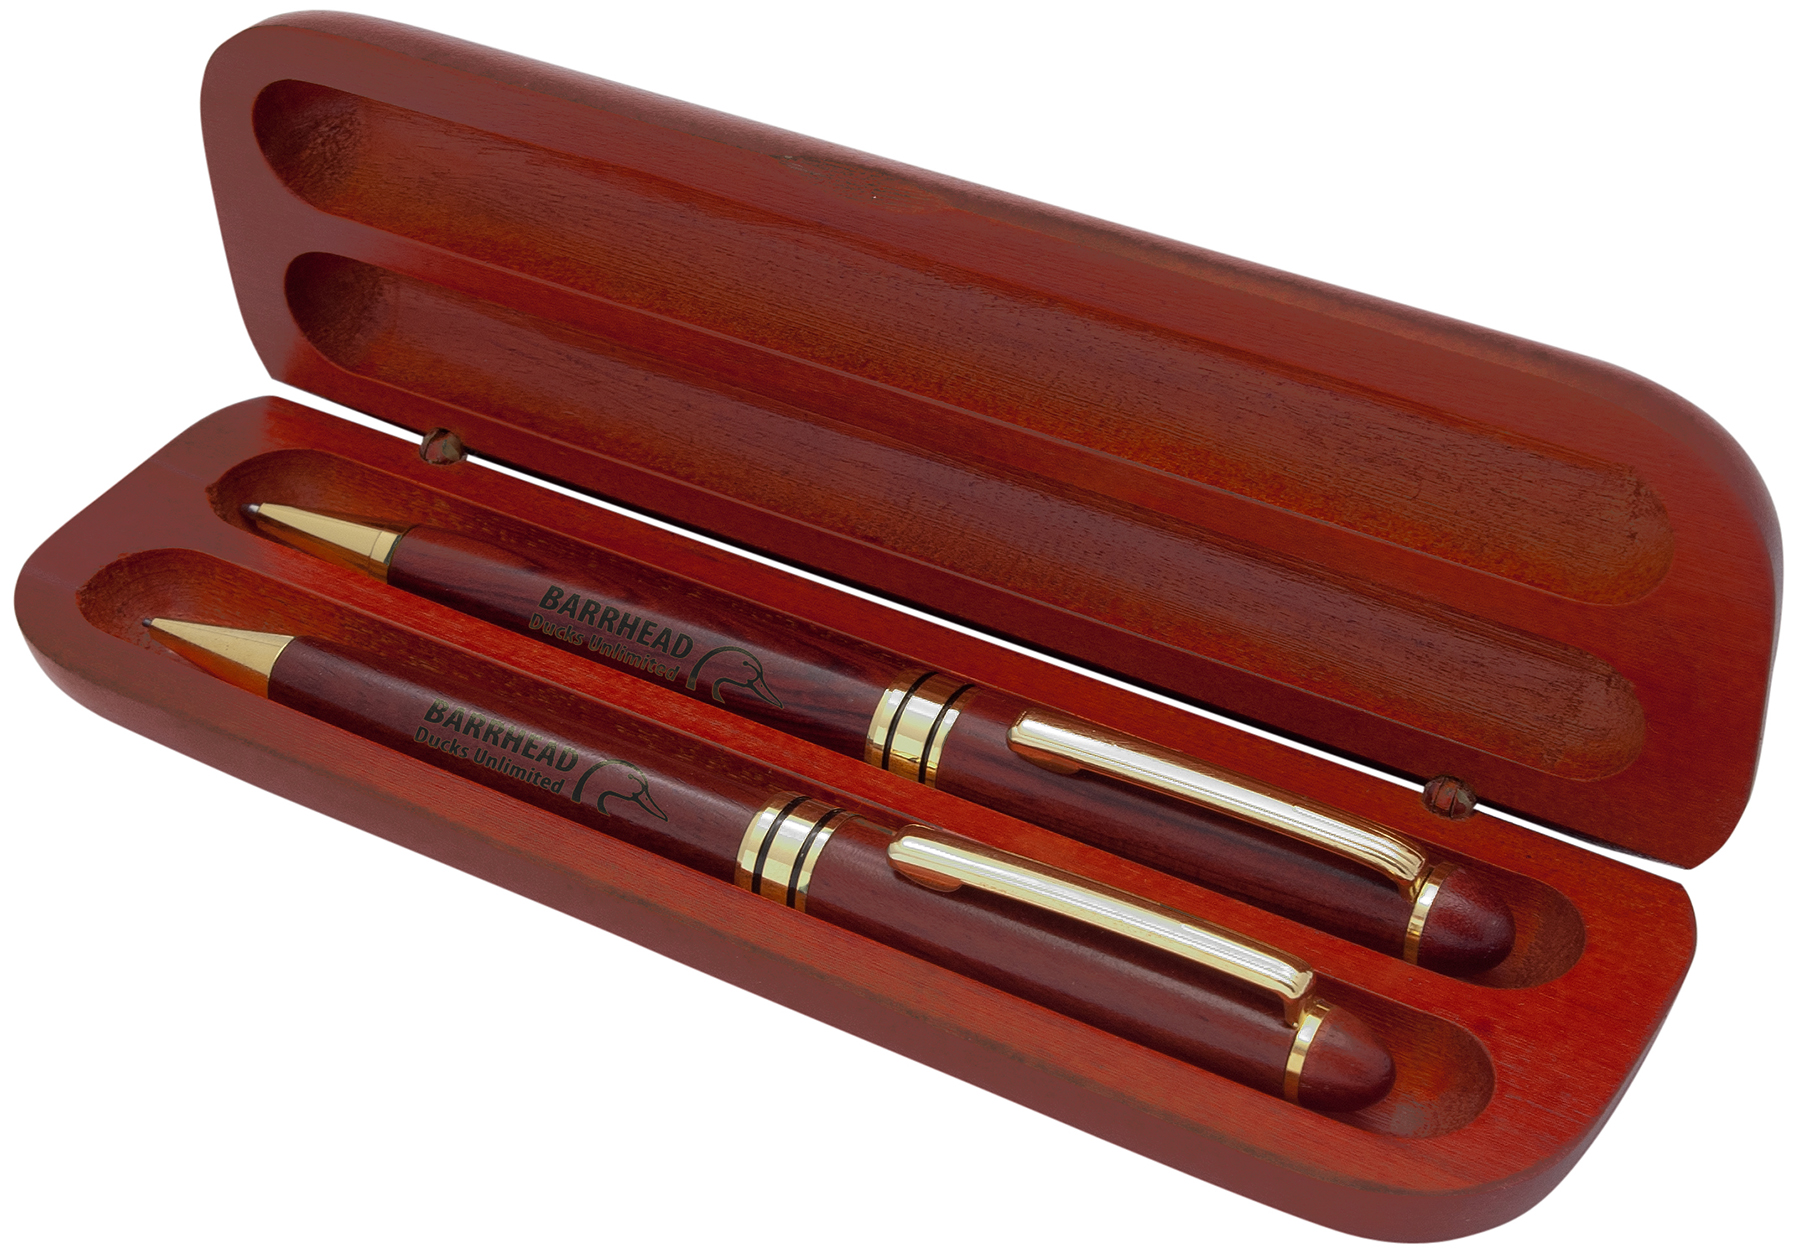 crewtone 20336 Esthetic Ruby Check Roller Ball Pen, Luxury Metal Pen with  Black Clip & Black Trim, Gift Set For Men & Women, Professional, Executive,  Nice Pen With Gift Box. : Amazon.in: